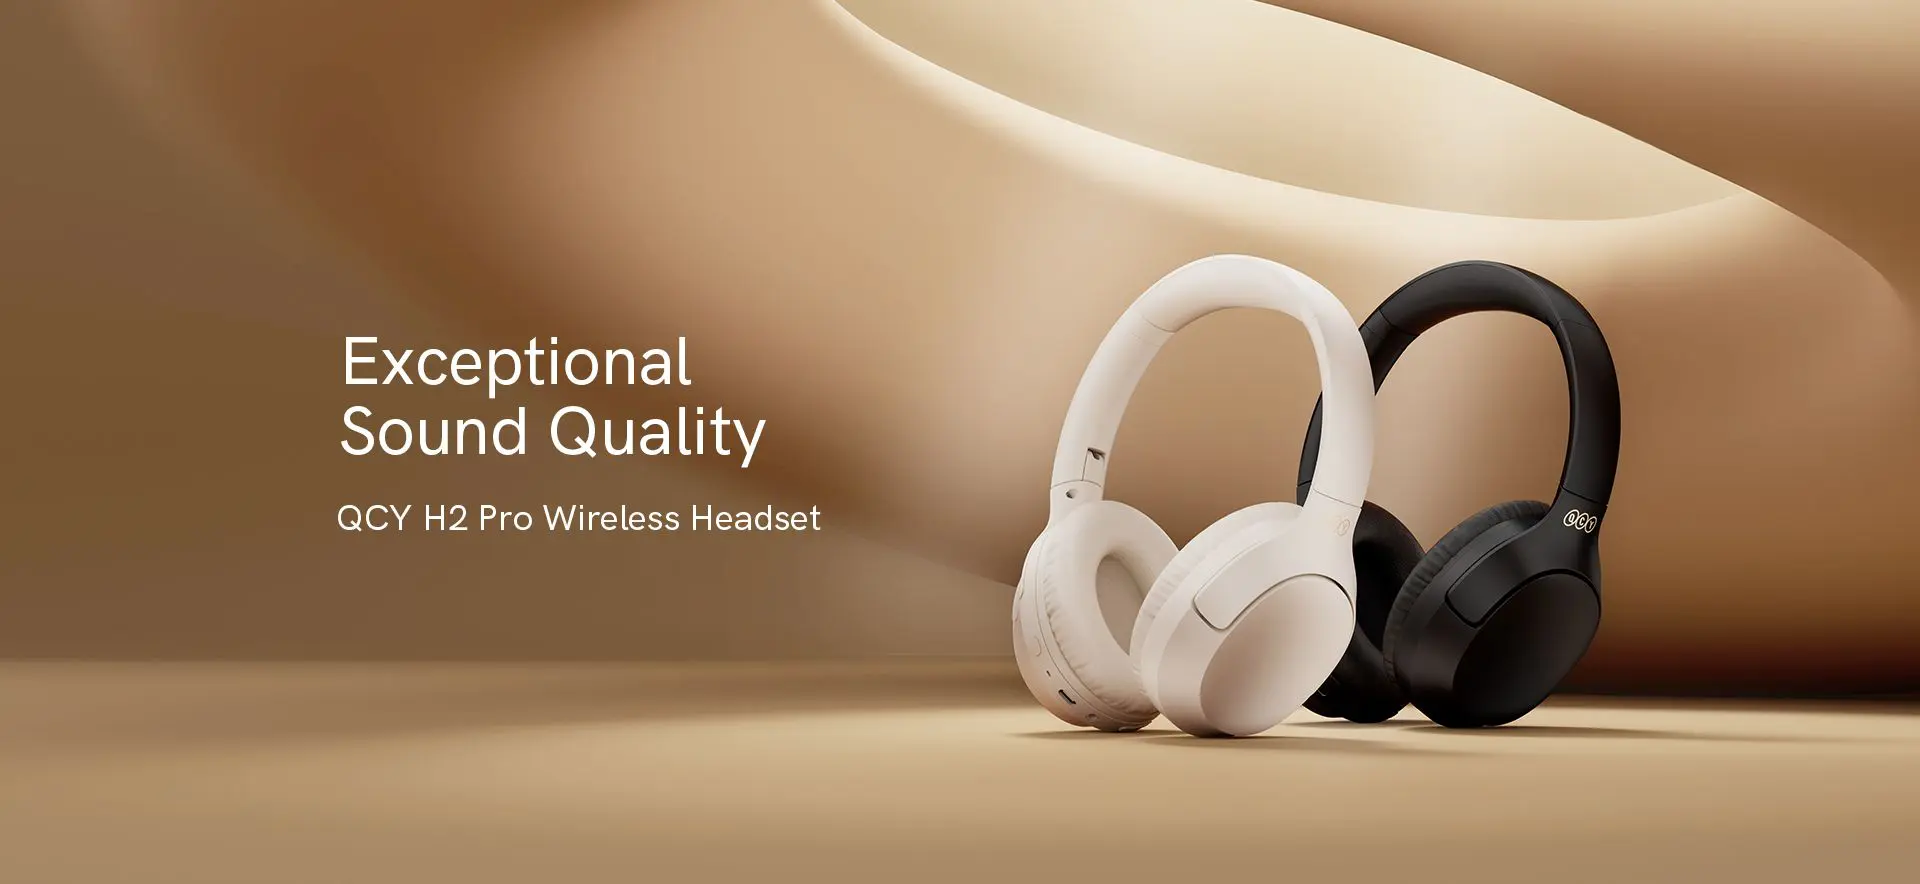 Qcy H2 Pro 43dB hybrid Active Noice Cancellation Overhead Earphone products Deximpo 1 _ Deximpo International Limited